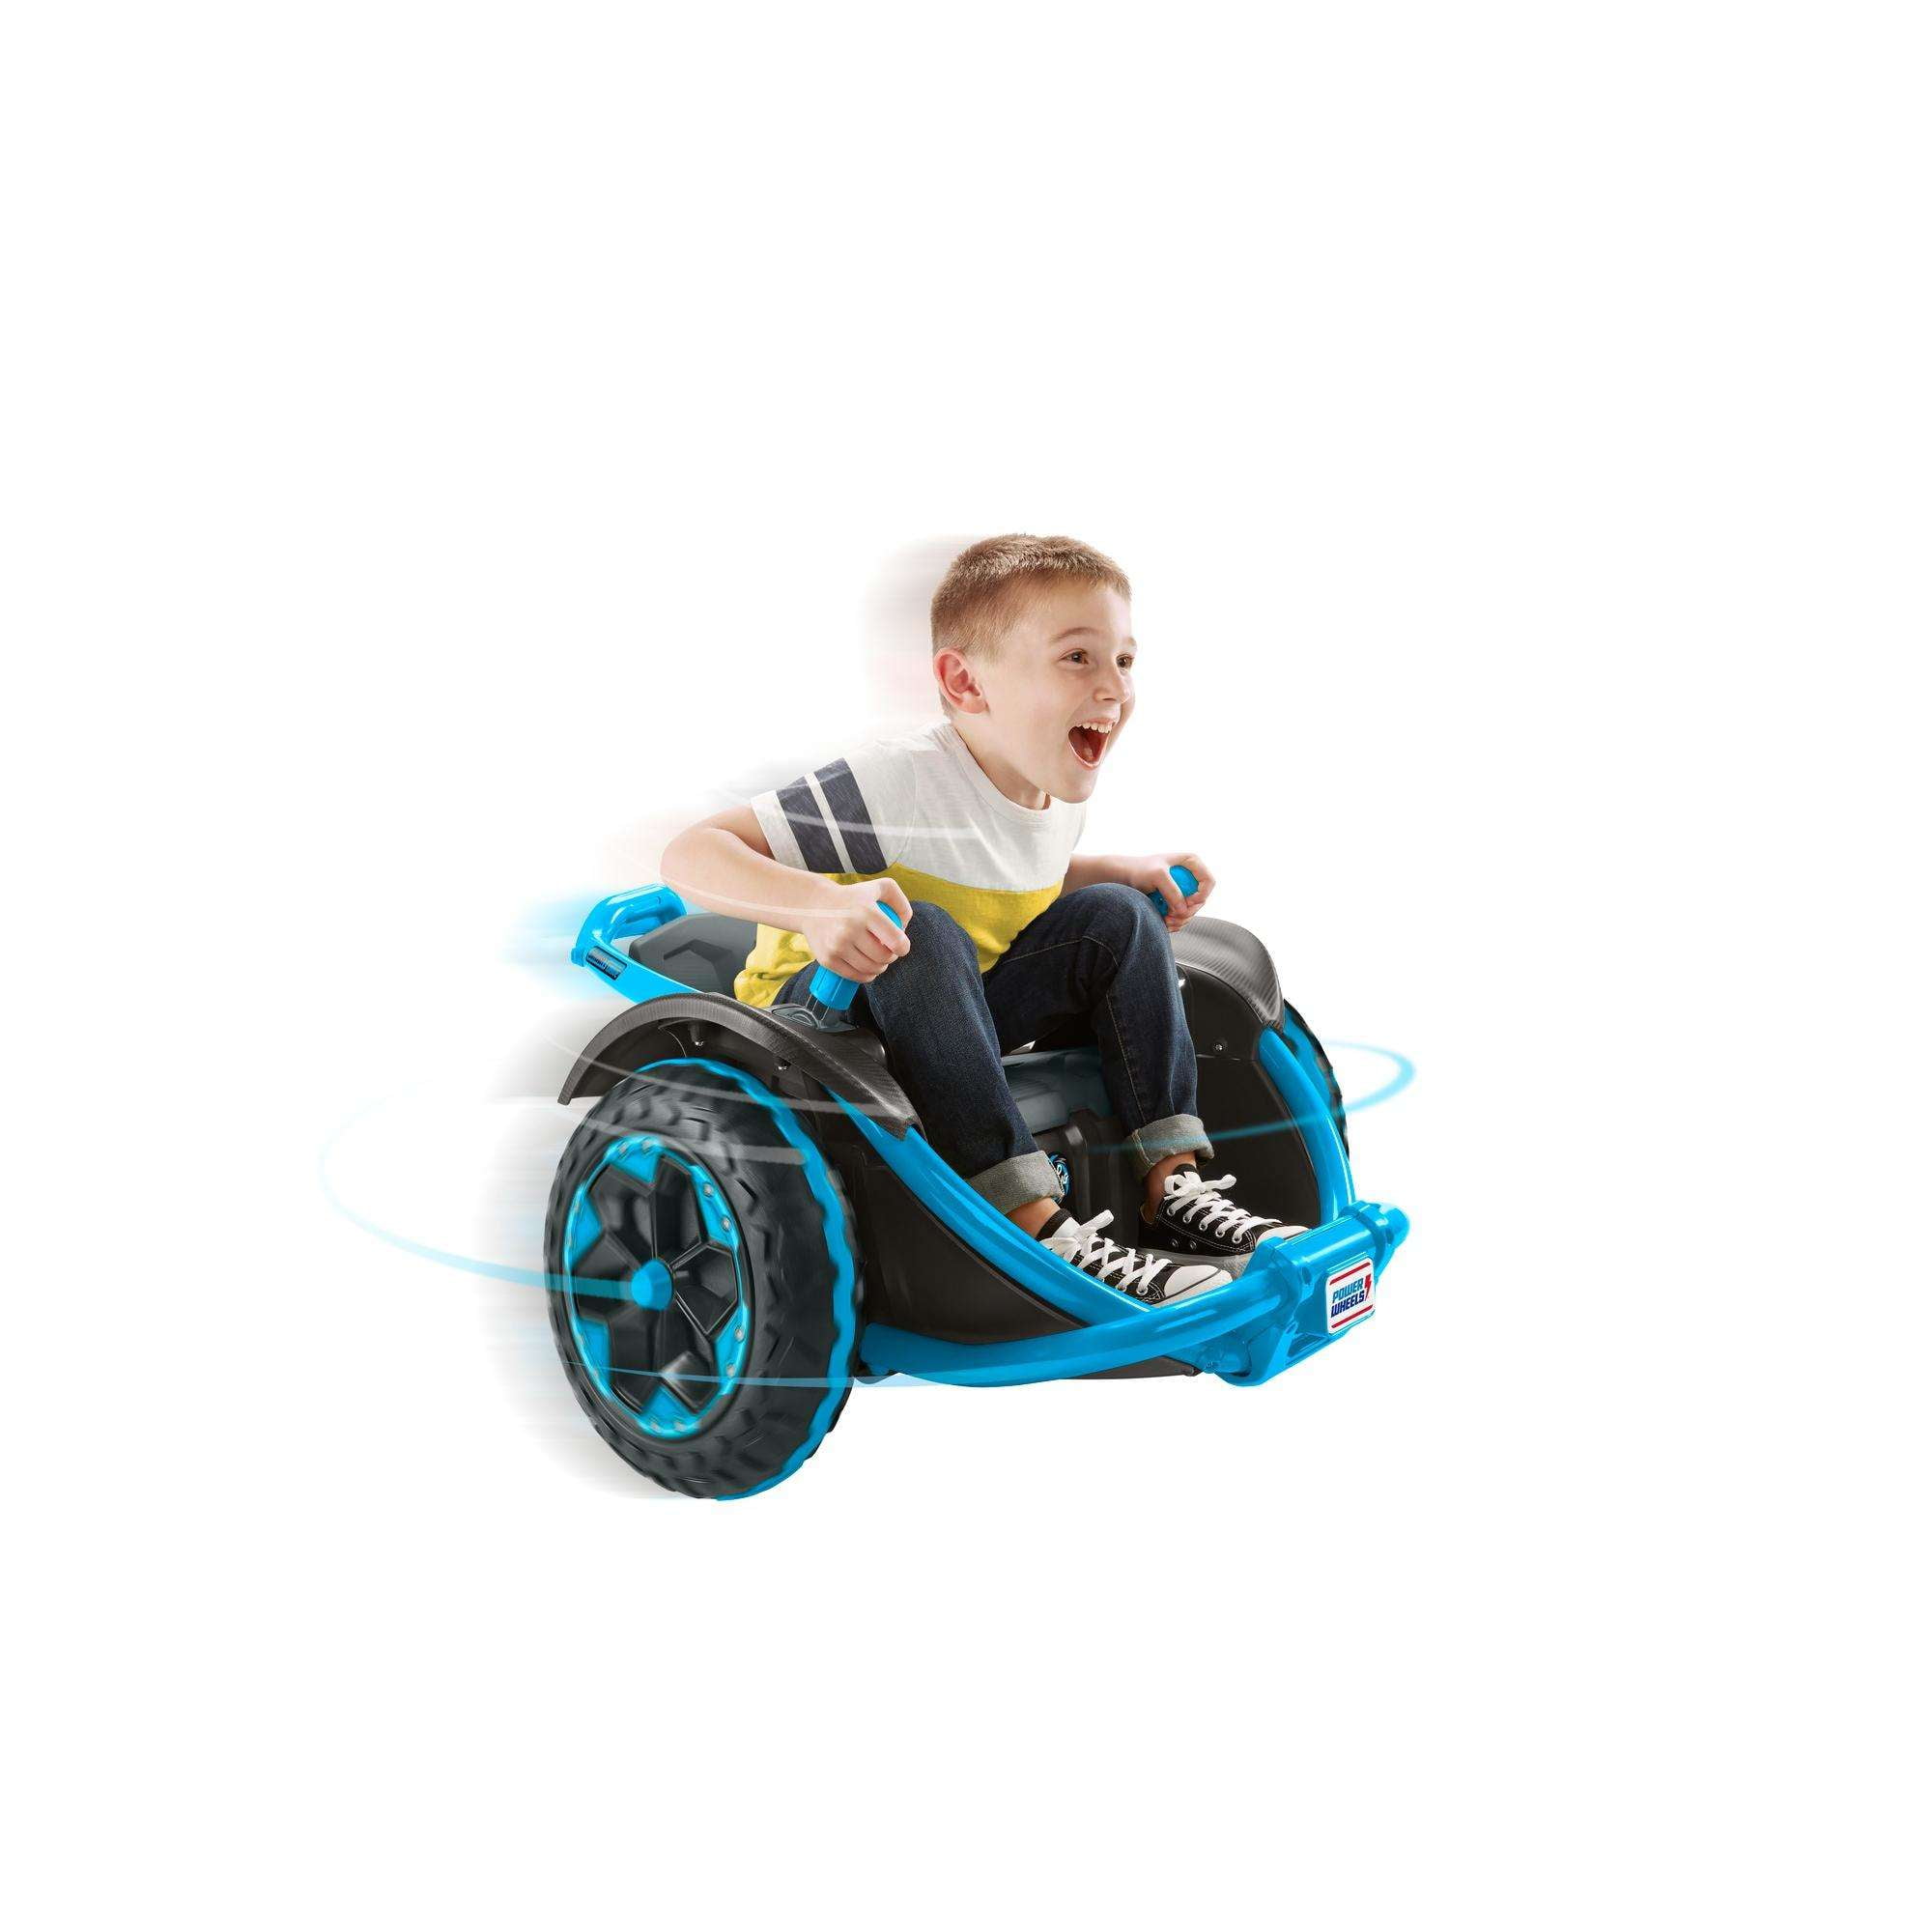 fisher price power wheels wild thing ride on